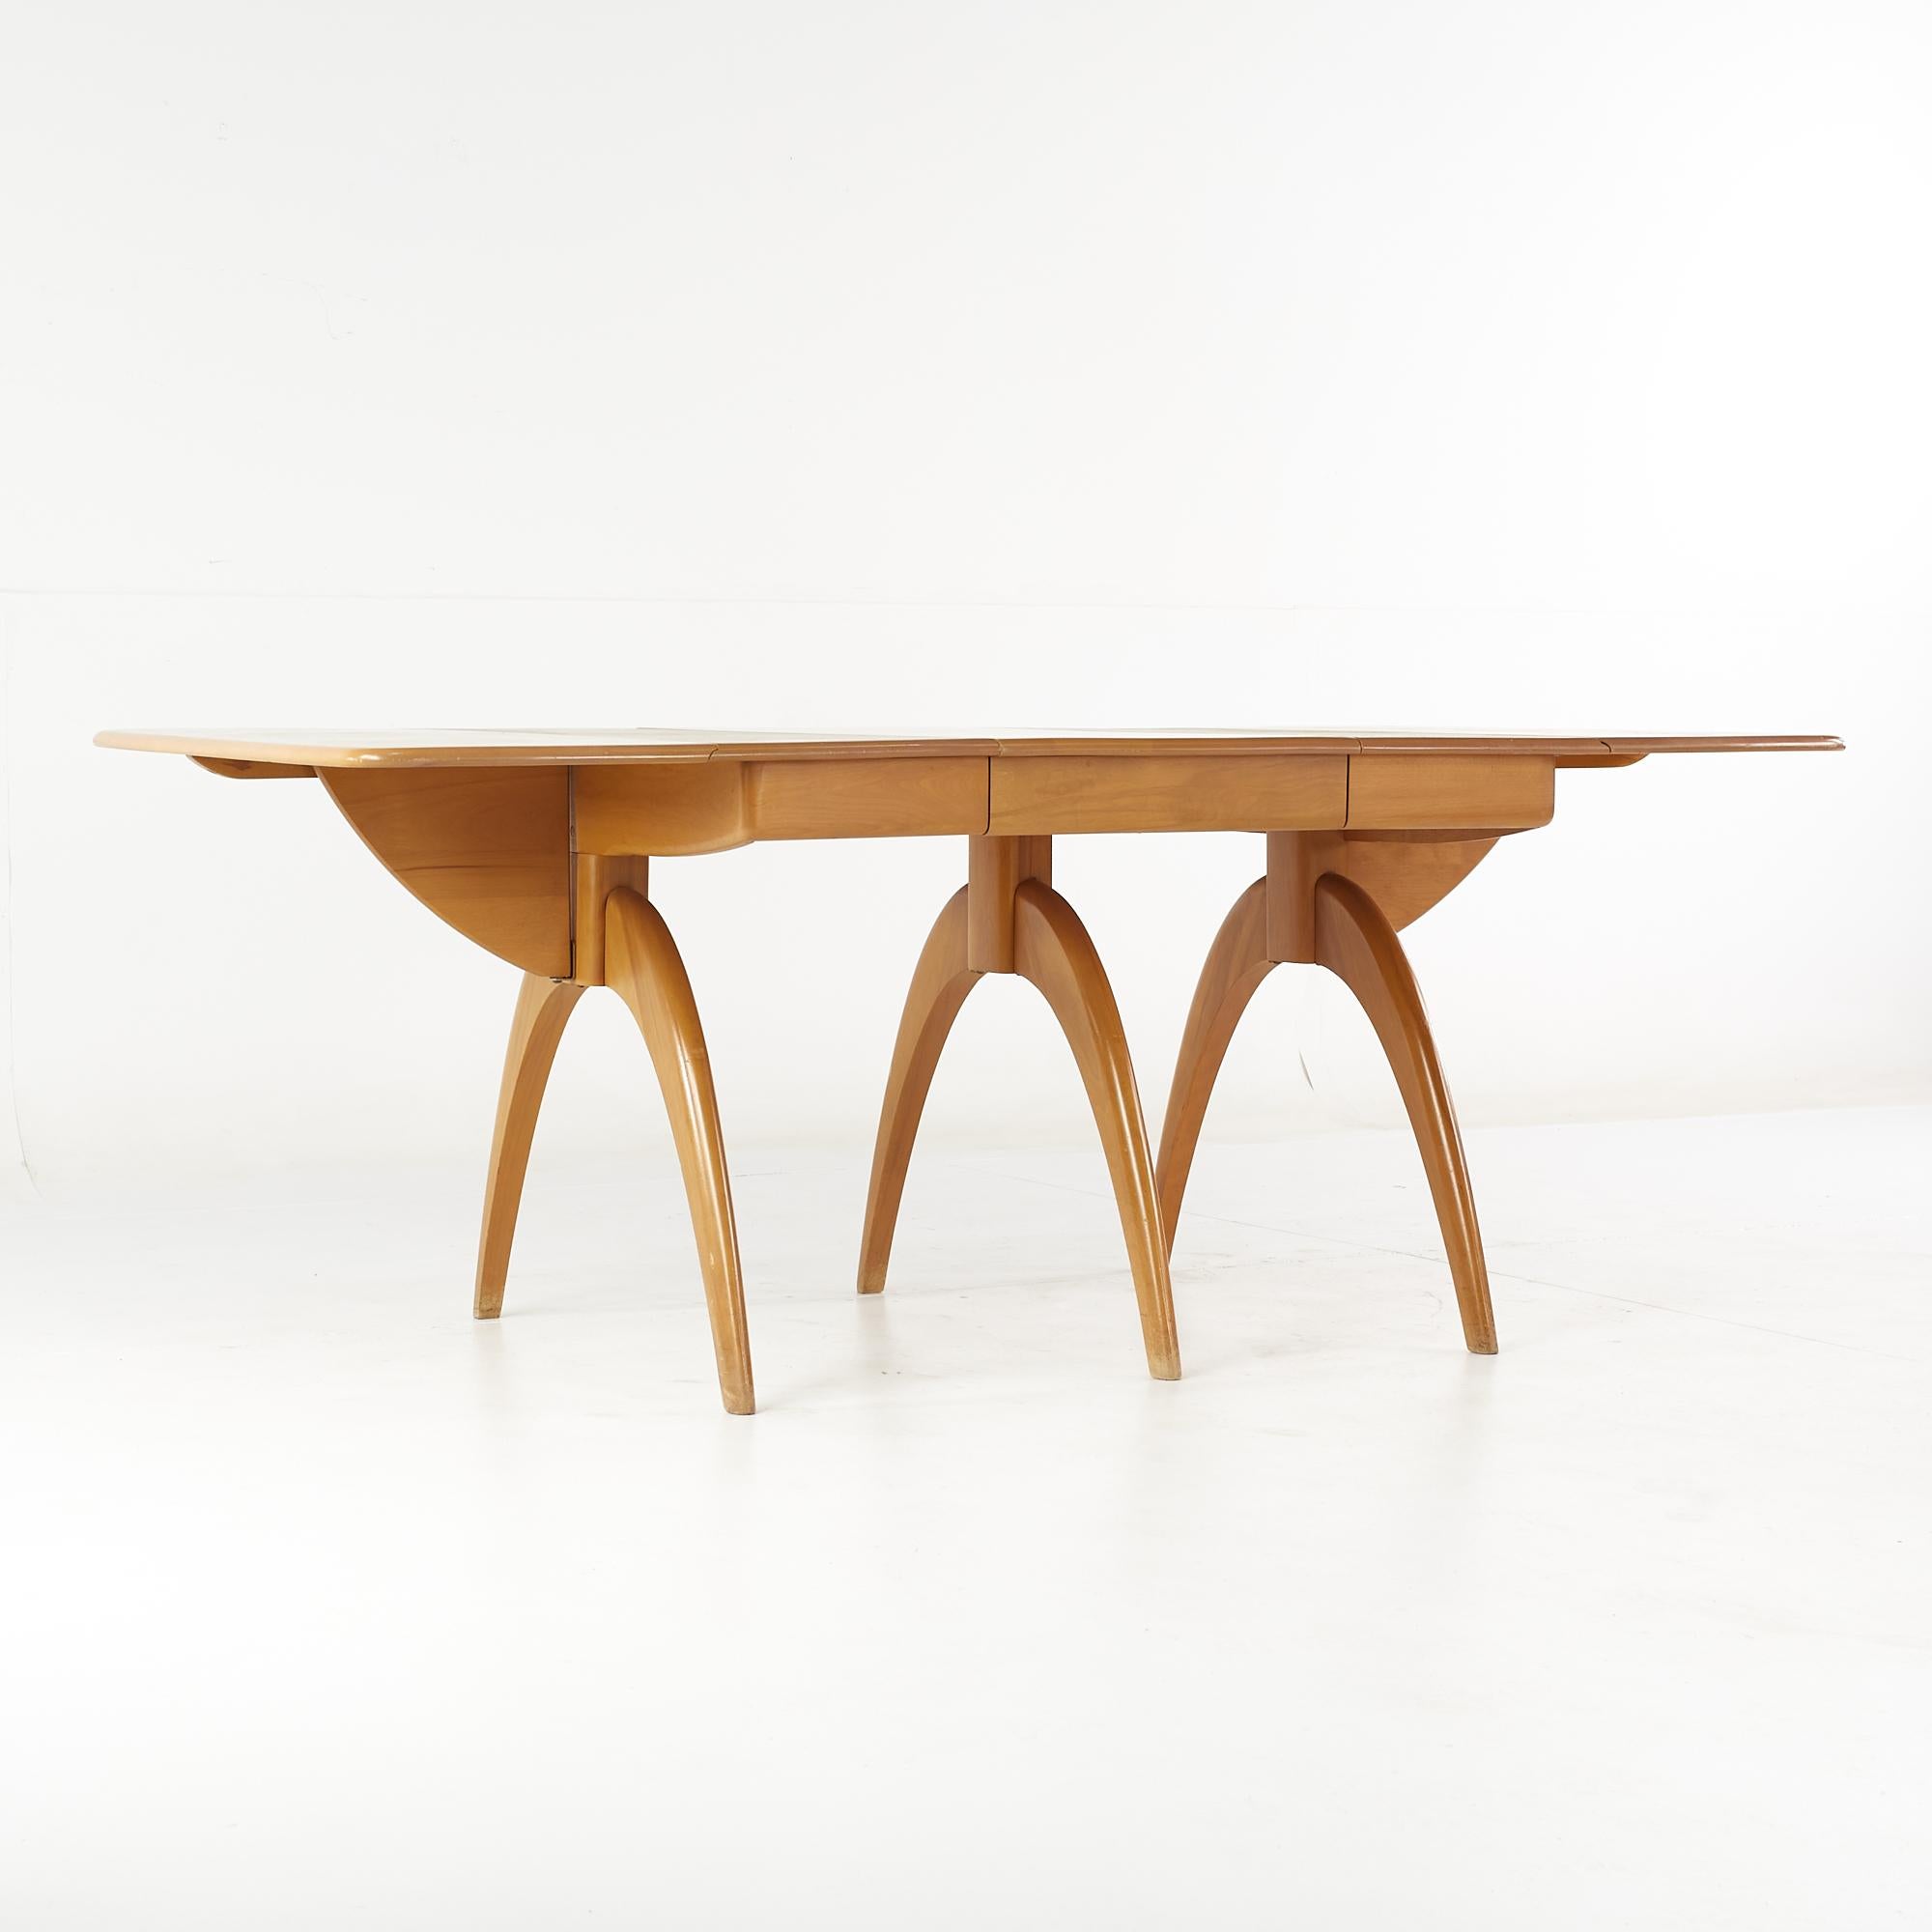 Wood Heywood Wakefield Mid Century Wishbone Dining Table with 2 Leaves For Sale